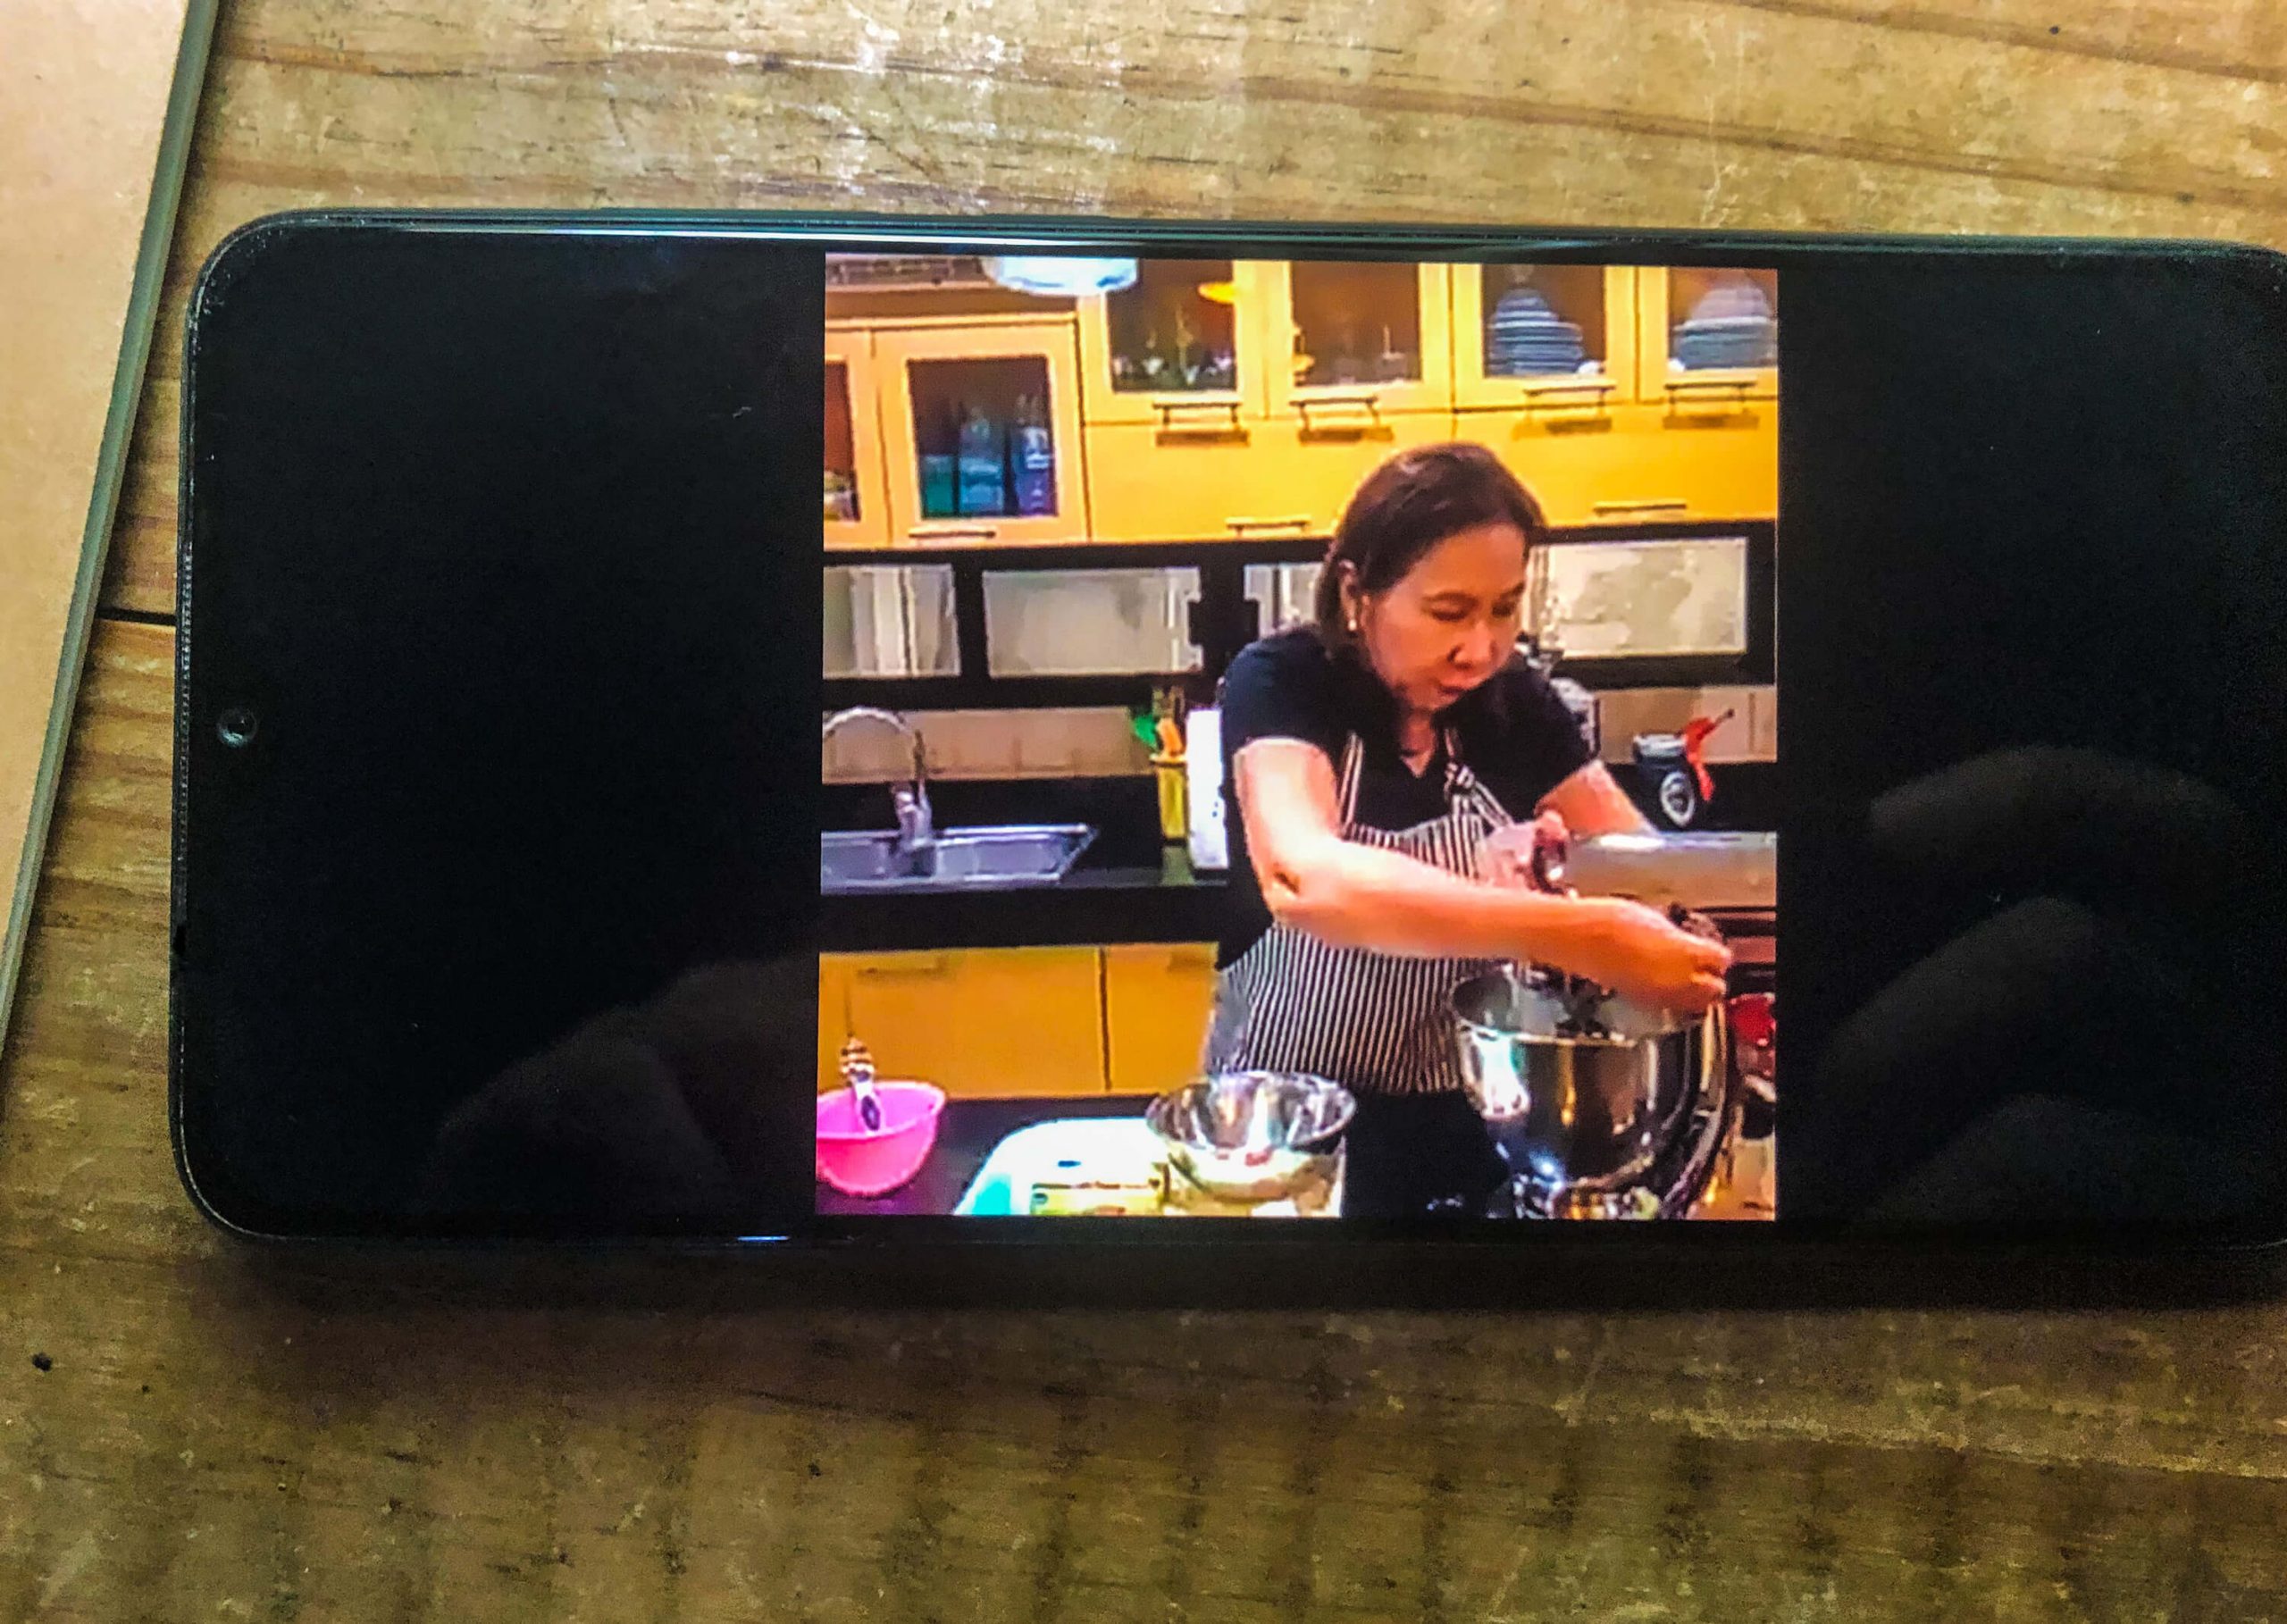 UBE CHEESE PAN DE SAL. Veteran chef Rose Marie Lim of Cebu’s Caro and Marie demonstrates how to bake the latest food craze ube cheese pan de sal in a Facebook video.